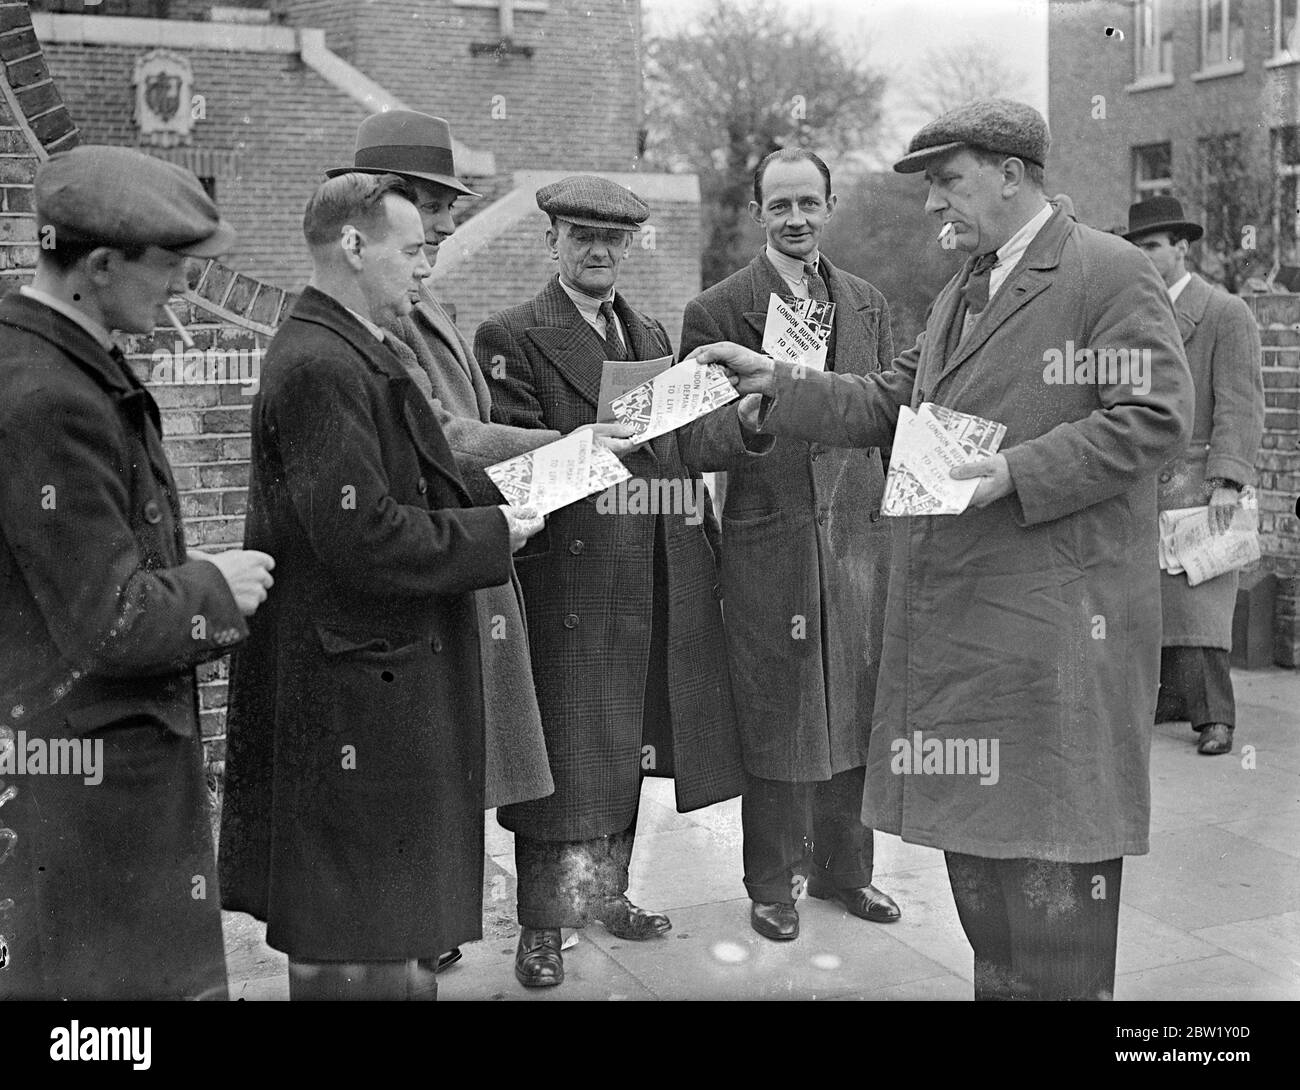 Busmen meet in London to endorse strike act action. A meeting of bus delegates of the Transport and General Workers Union was held at the Woodbury Hall, Green Lanes, Stoke Newington, when it was expected that final endorsement of strike action would be given following the complete failure of the negotiations which have been proceeding all the week. Photo shows busmen handing out leaflets putting forward the busmen's point of view as the meeting was held. 30 April 1937 Stock Photo